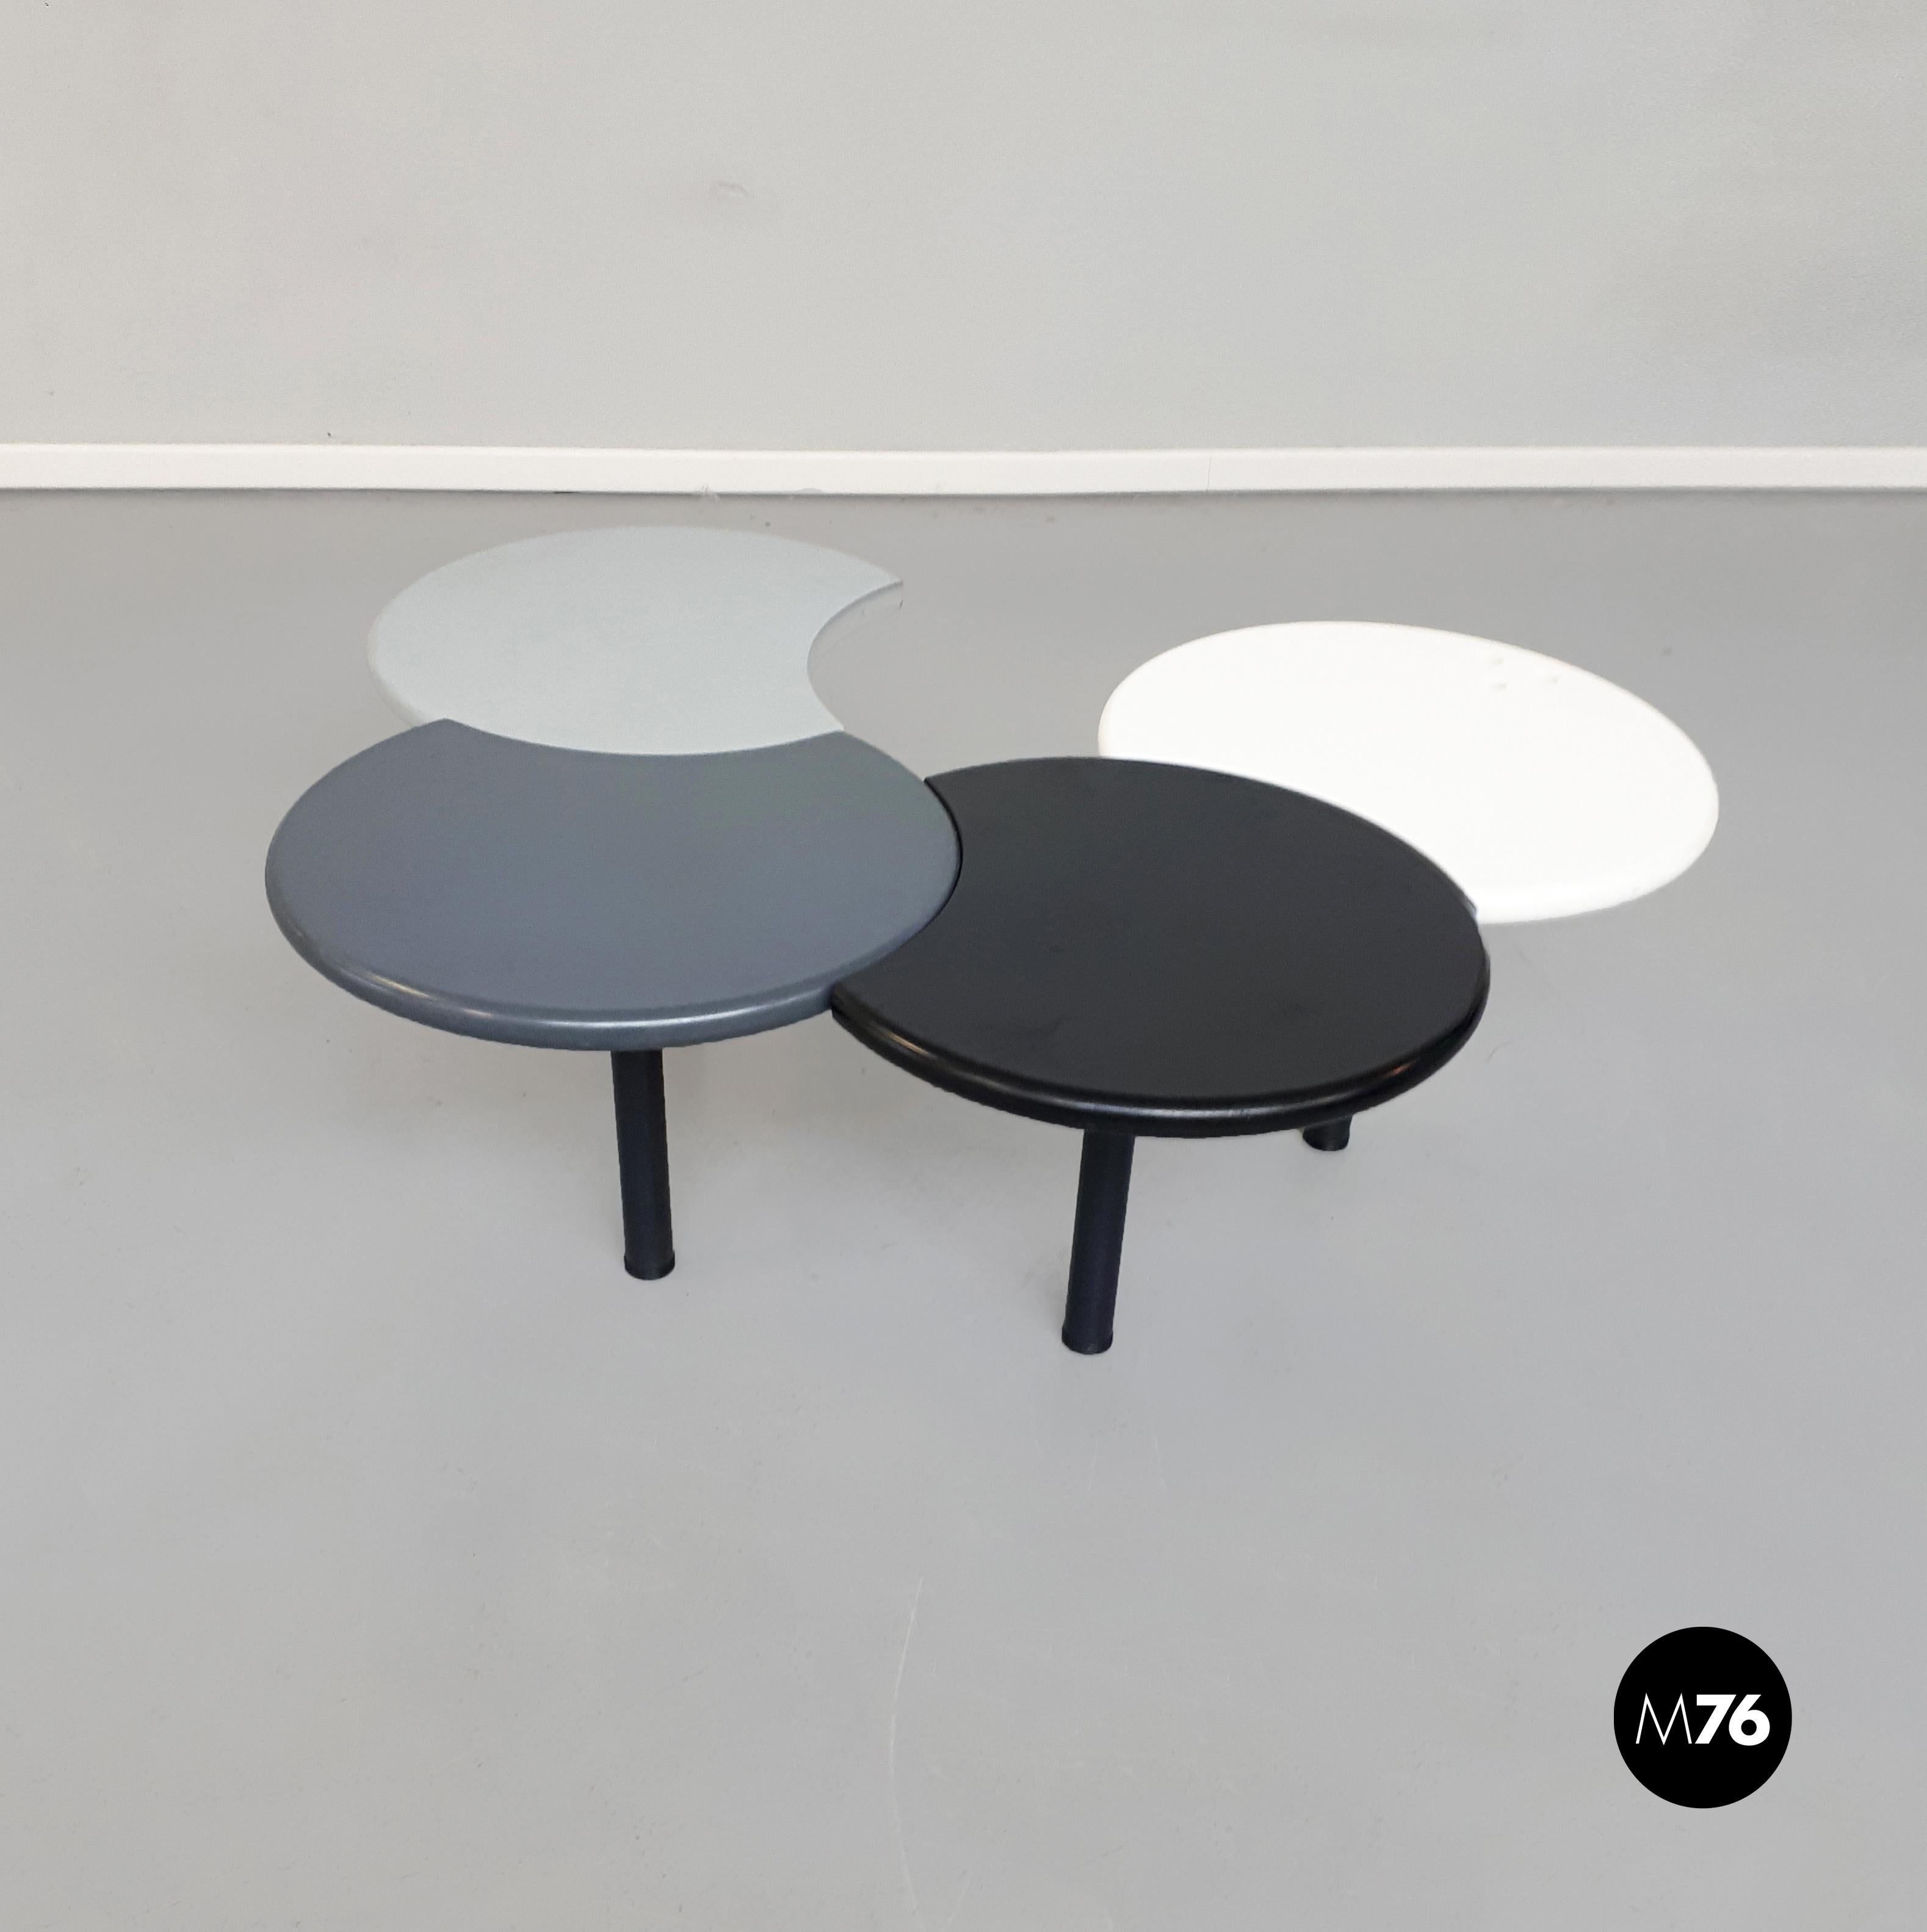 Italian mid-Century Modern Coffee Table by Hosoe  Marinelli for Arflex, 1980s
Coffee table in lacquered wood formed by four mobile circles resting on solid black wooden legs. The rims come in four colors: black, dark gray, light gray,